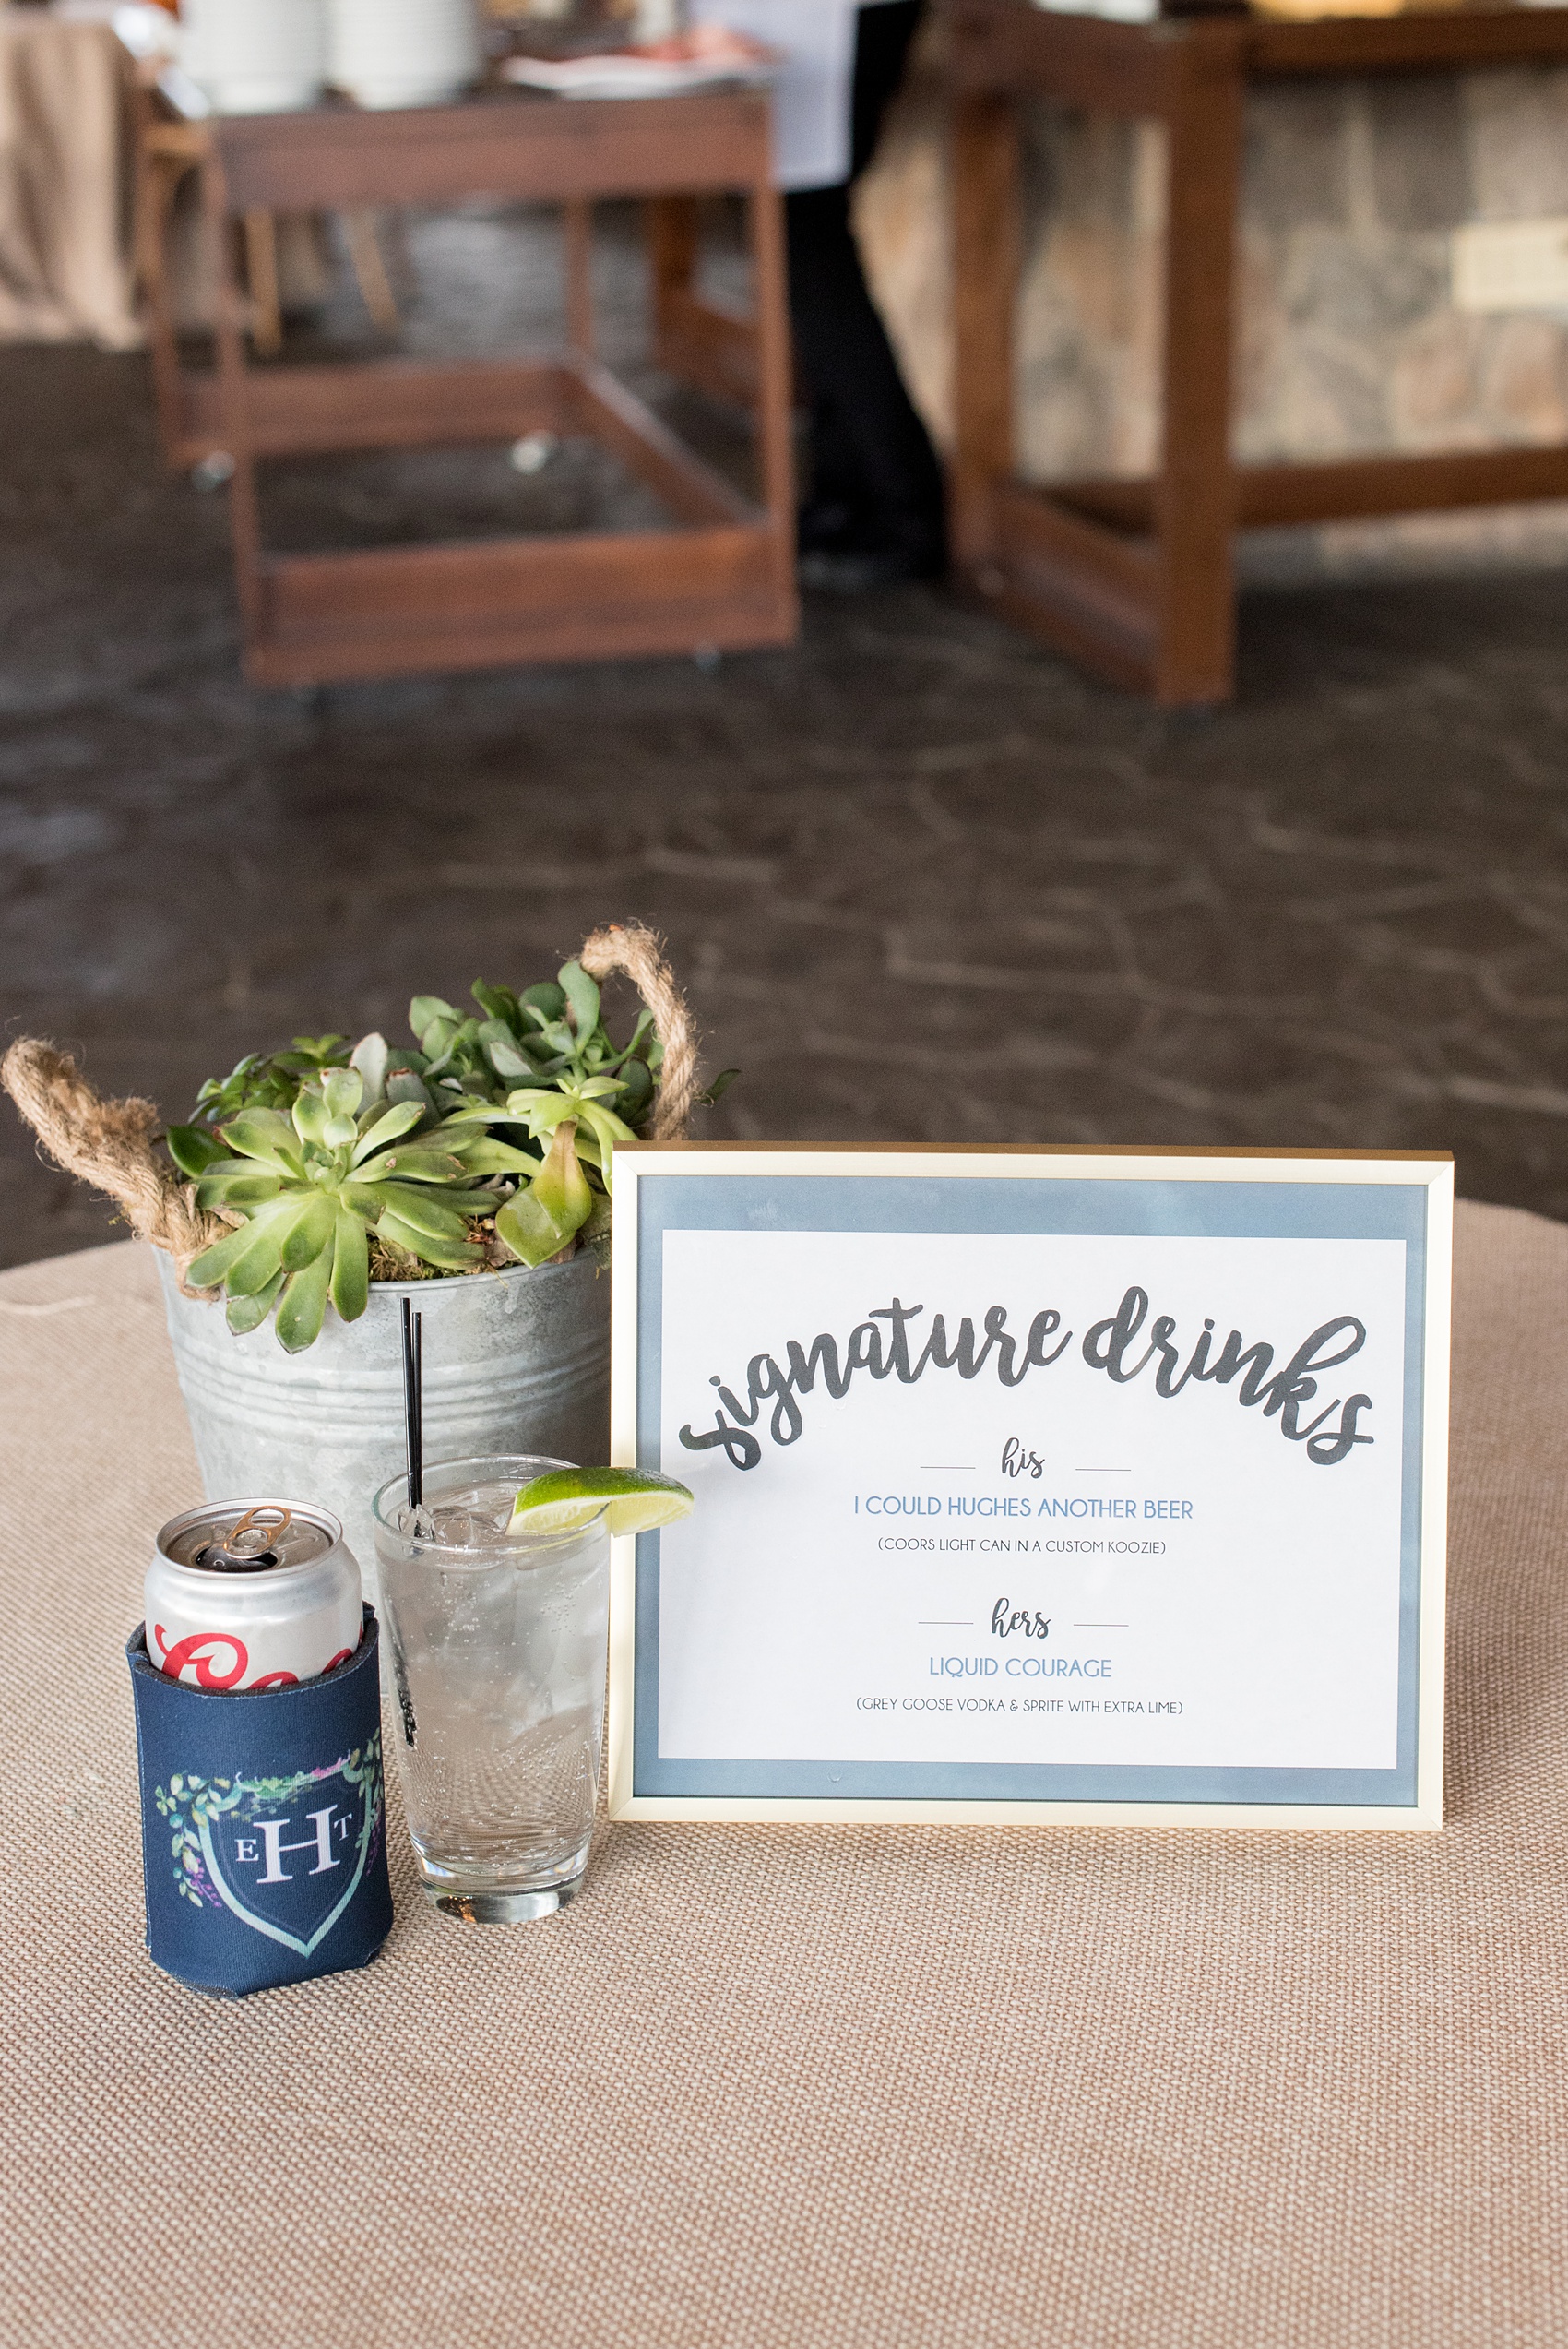 Crystal Springs Resort wedding photos in New Jersey, with photographer Mikkel Paige Photography. The couple’s spring wedding had an outdoor ceremony with photos at this rustic, woodsy venue showing their blue and pink palette decor from getting ready to their reception. This photo shows the couple's custom koozies and signature drinks sign. Click through to see their complete wedding recap! #NewJerseywedding #MikkelPaige #NJweddingphotographer #NJphotographer #springwedding #pinkandblue #cocktailhour #signaturedrink